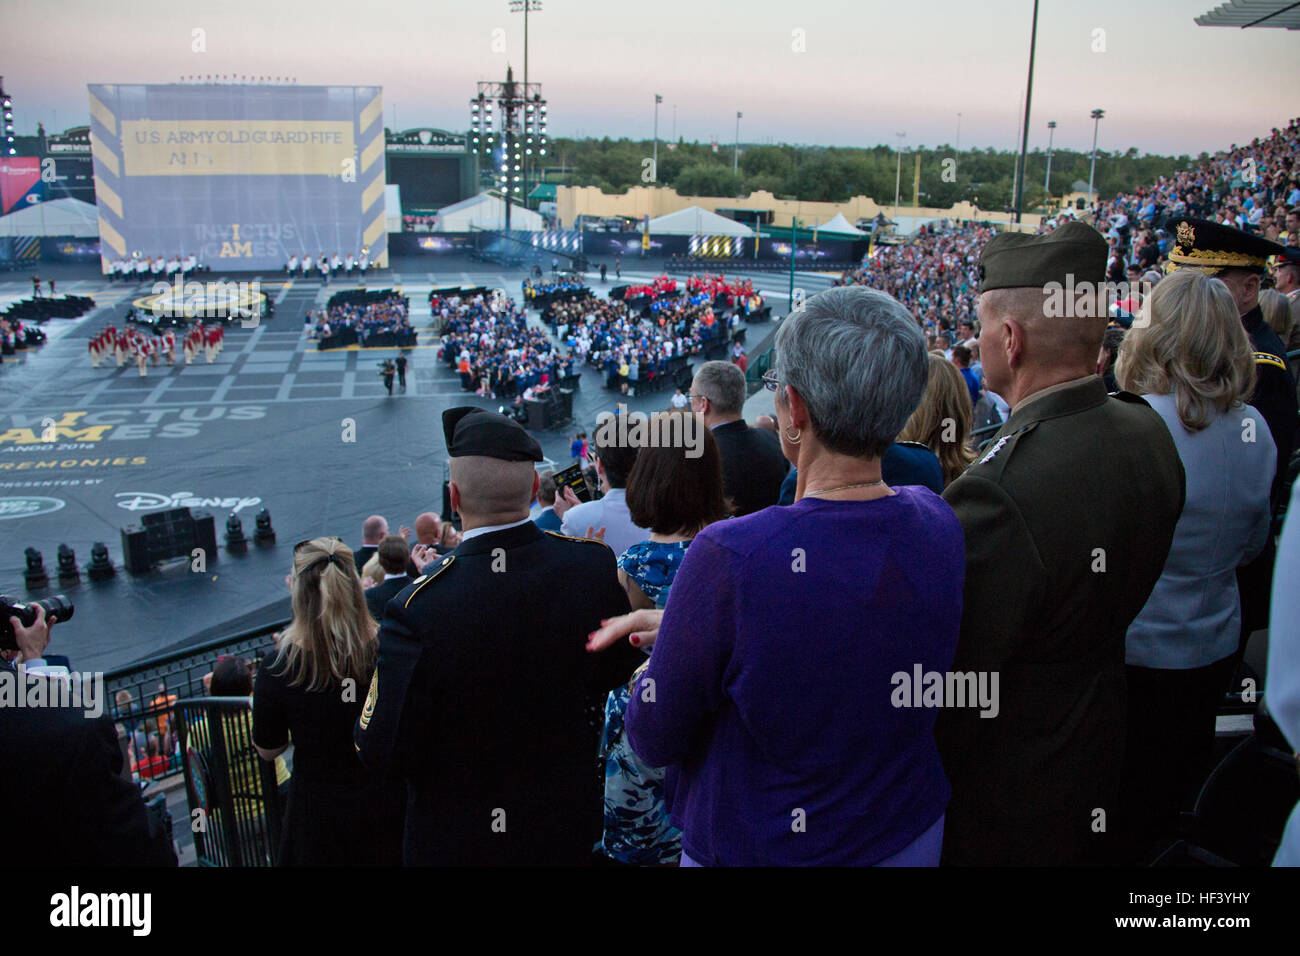 Commandant of the Marine Corps Gen. Robert B. Neller and his wife D'Arcy attend the opening ceremony of the Invictus Games at the ESPN Wide World of Sports Complex, Orlando, Fla., May 8, 2016. This year's games feature 500 wounded or injured service members from 14 nations competing in 10 adaptive sporting events. (U.S. Marine Corps photo by Staff Sgt. Gabriela Garcia/Released) CMC at the Invictus Games 160509-M-SA716-076 Stock Photo